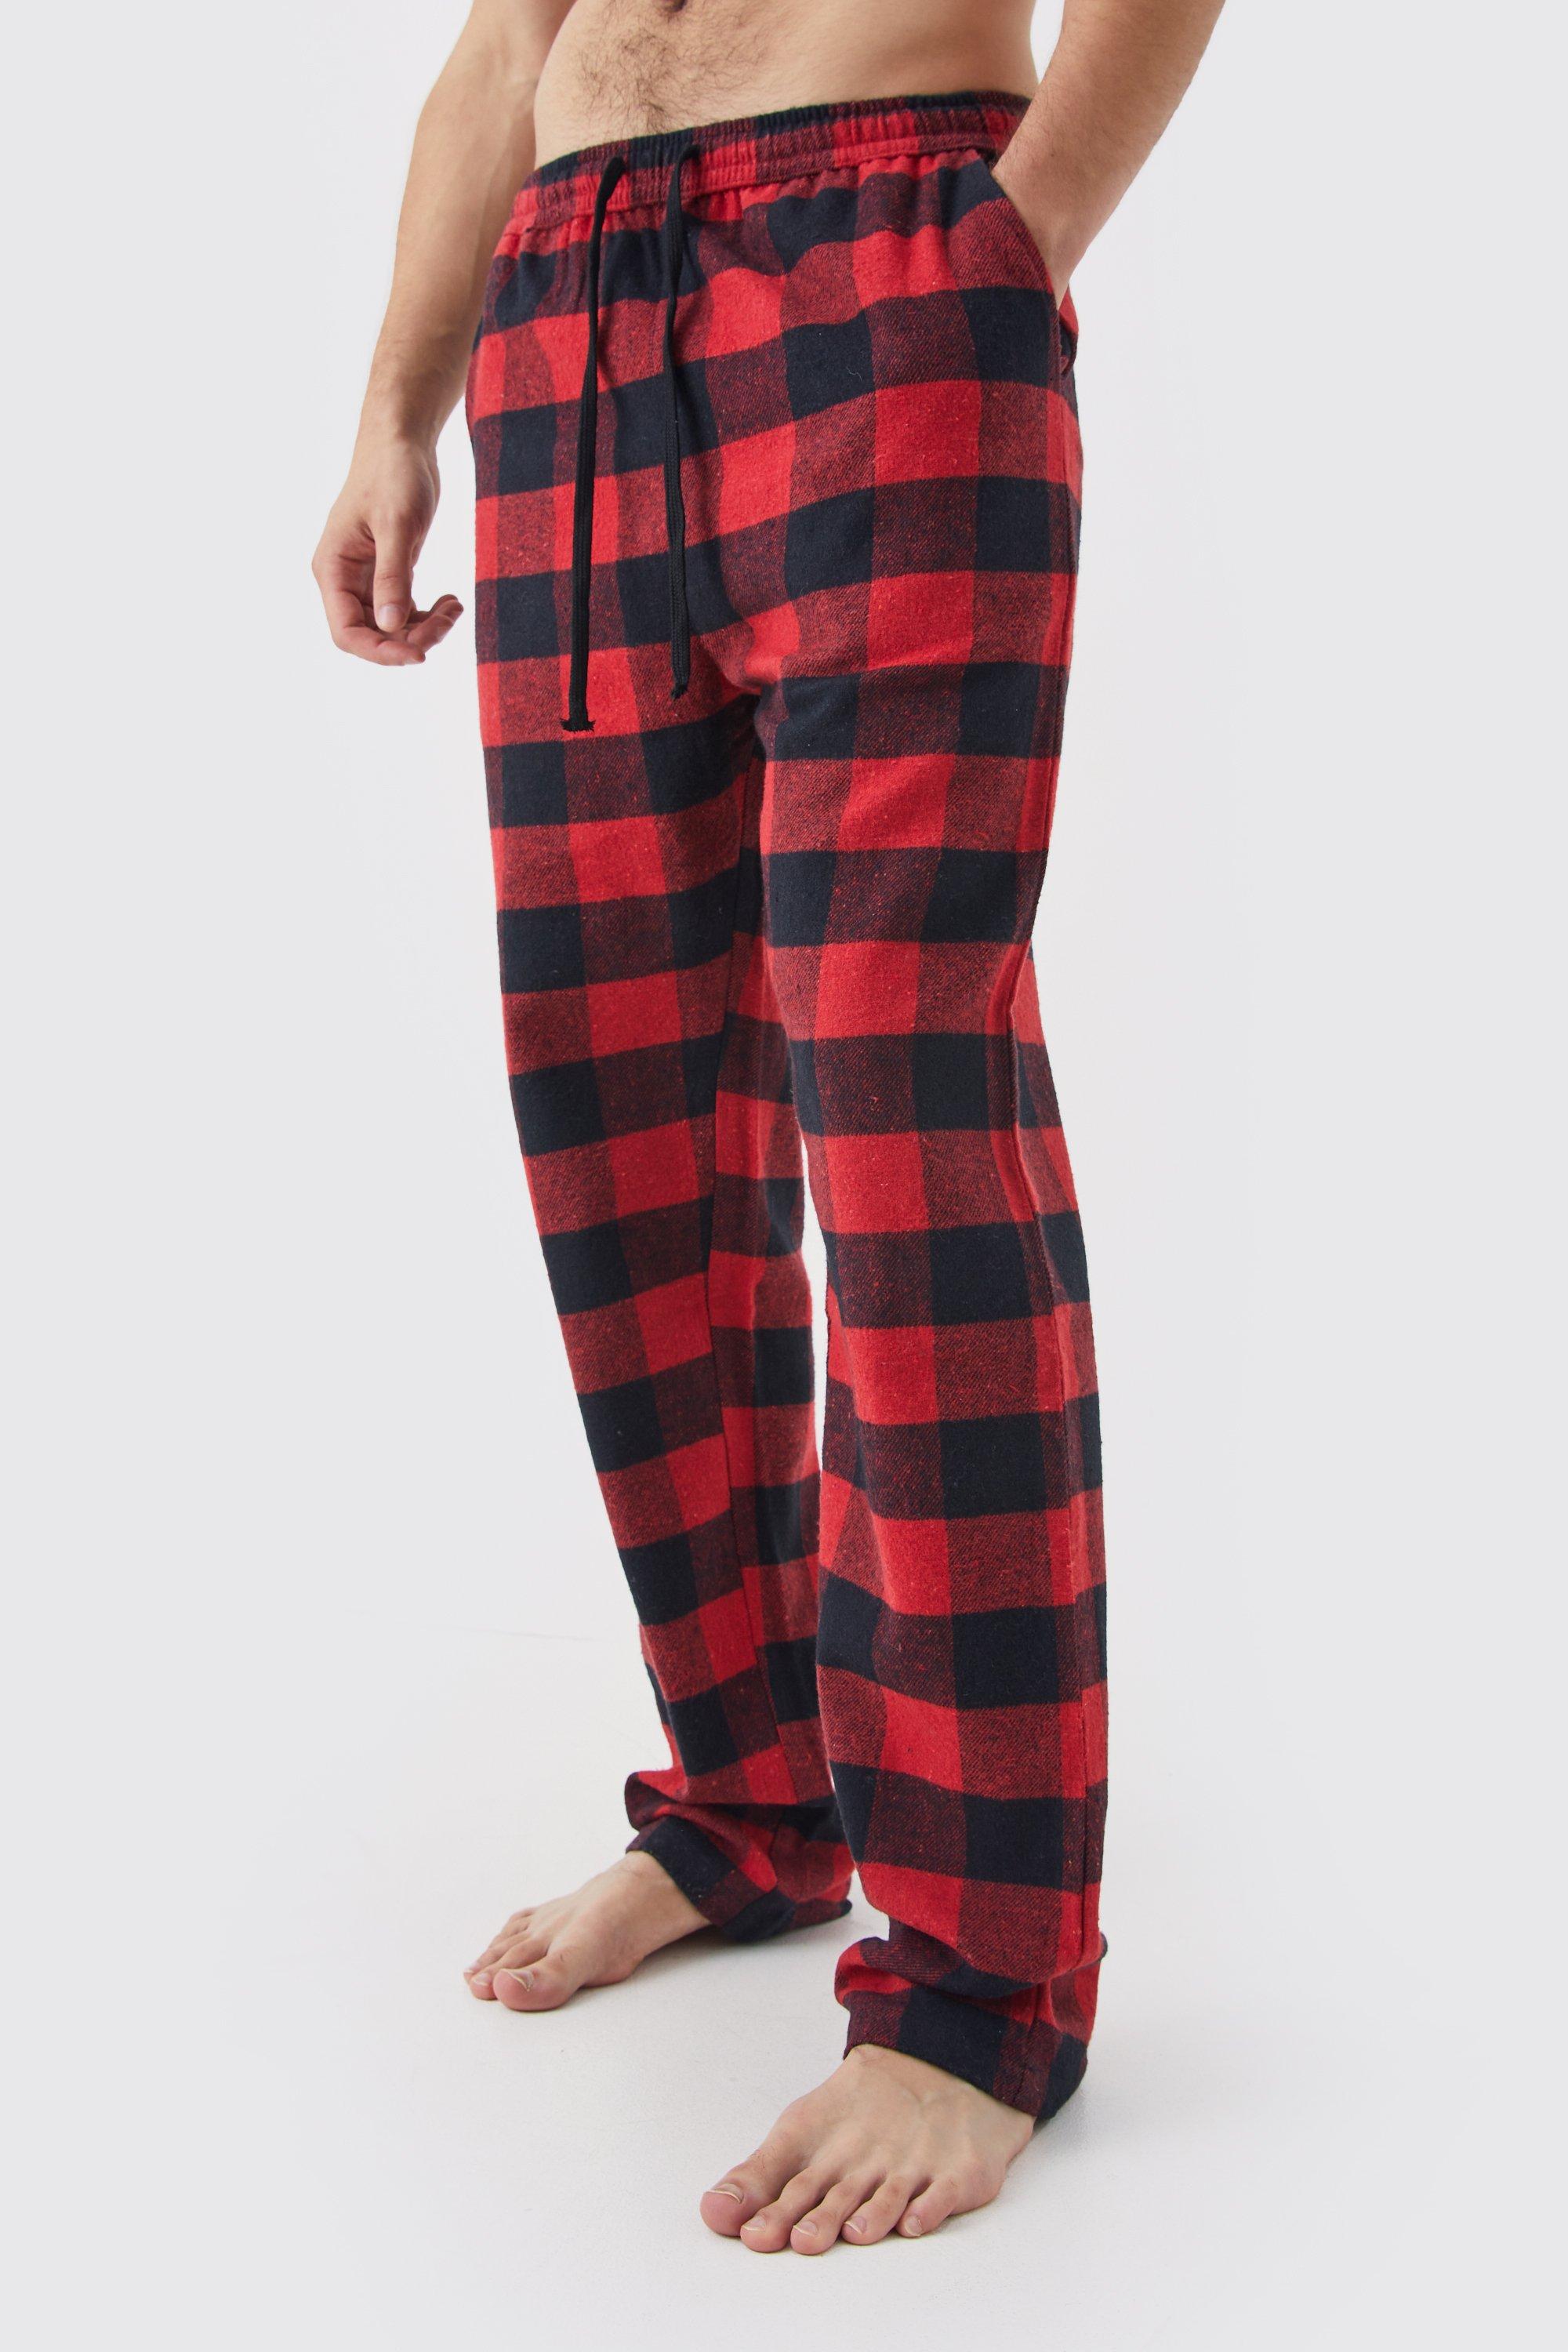 Men's Tall Woven Check Loungewear Trousers - Red - Xl, Red